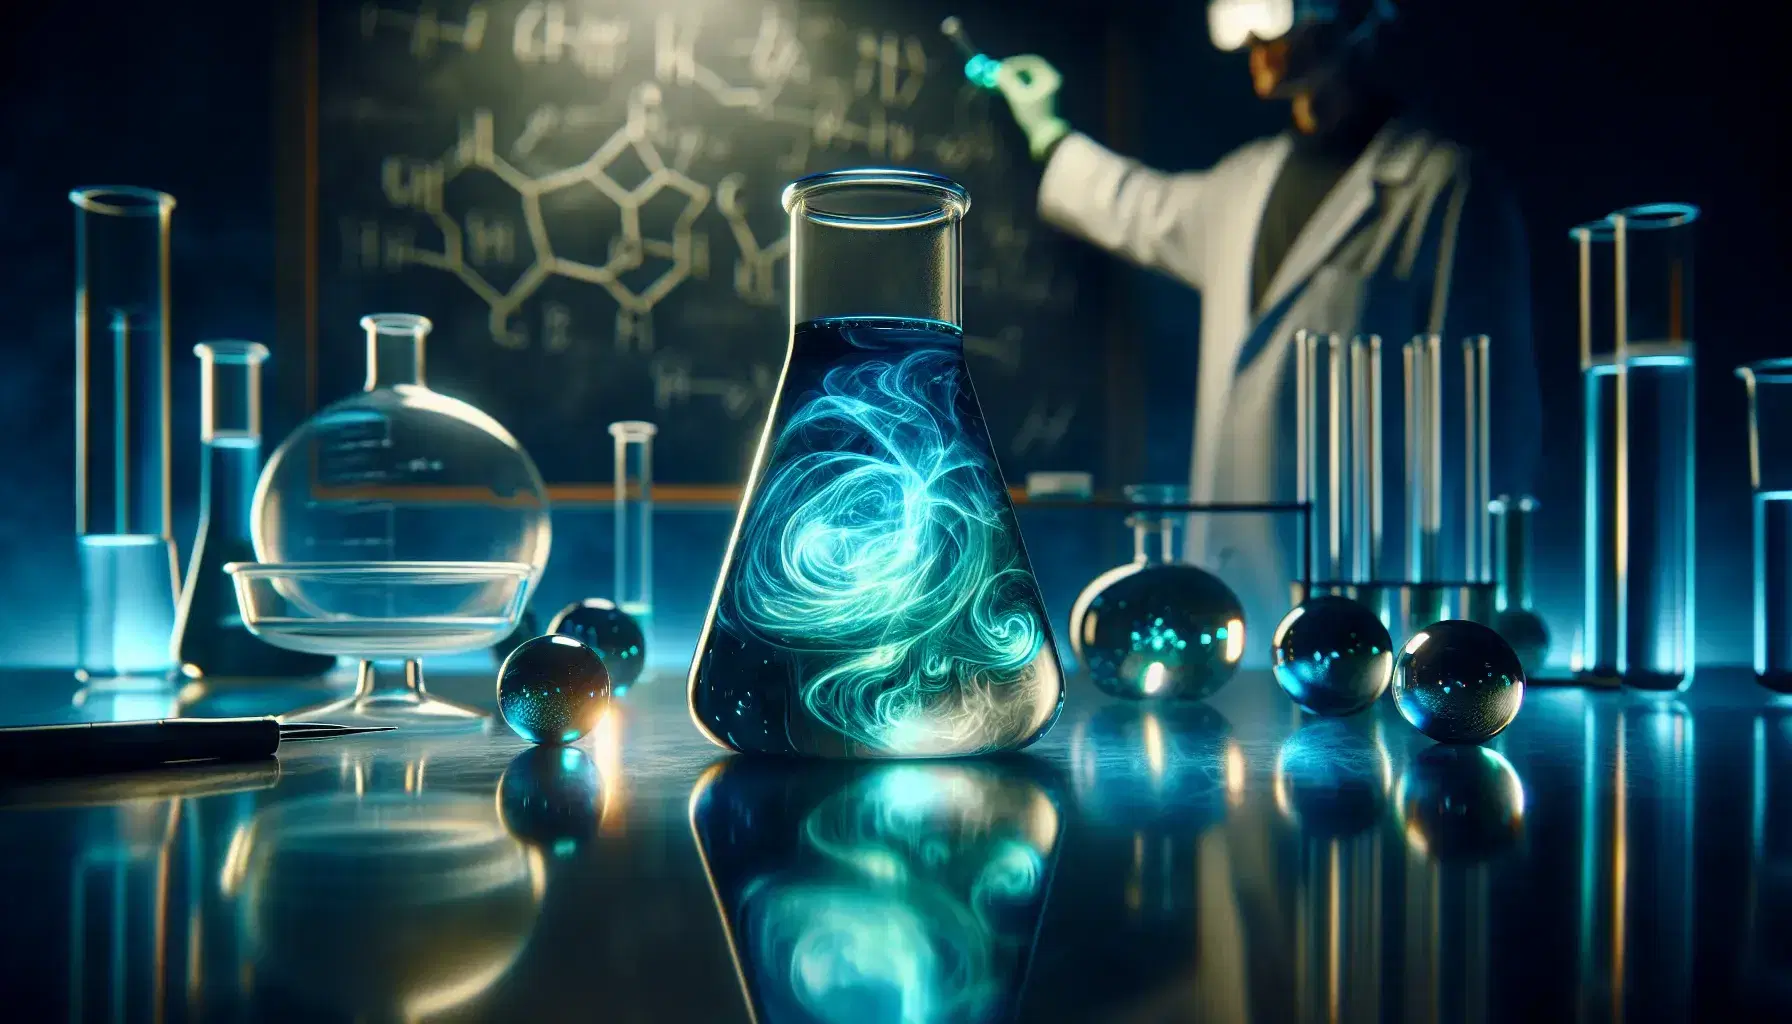 Laboratory scene with a luminescent blue liquid in a flask, a beaker with green liquid, metallic spheres in a petri dish, and a scientist examining another flask.